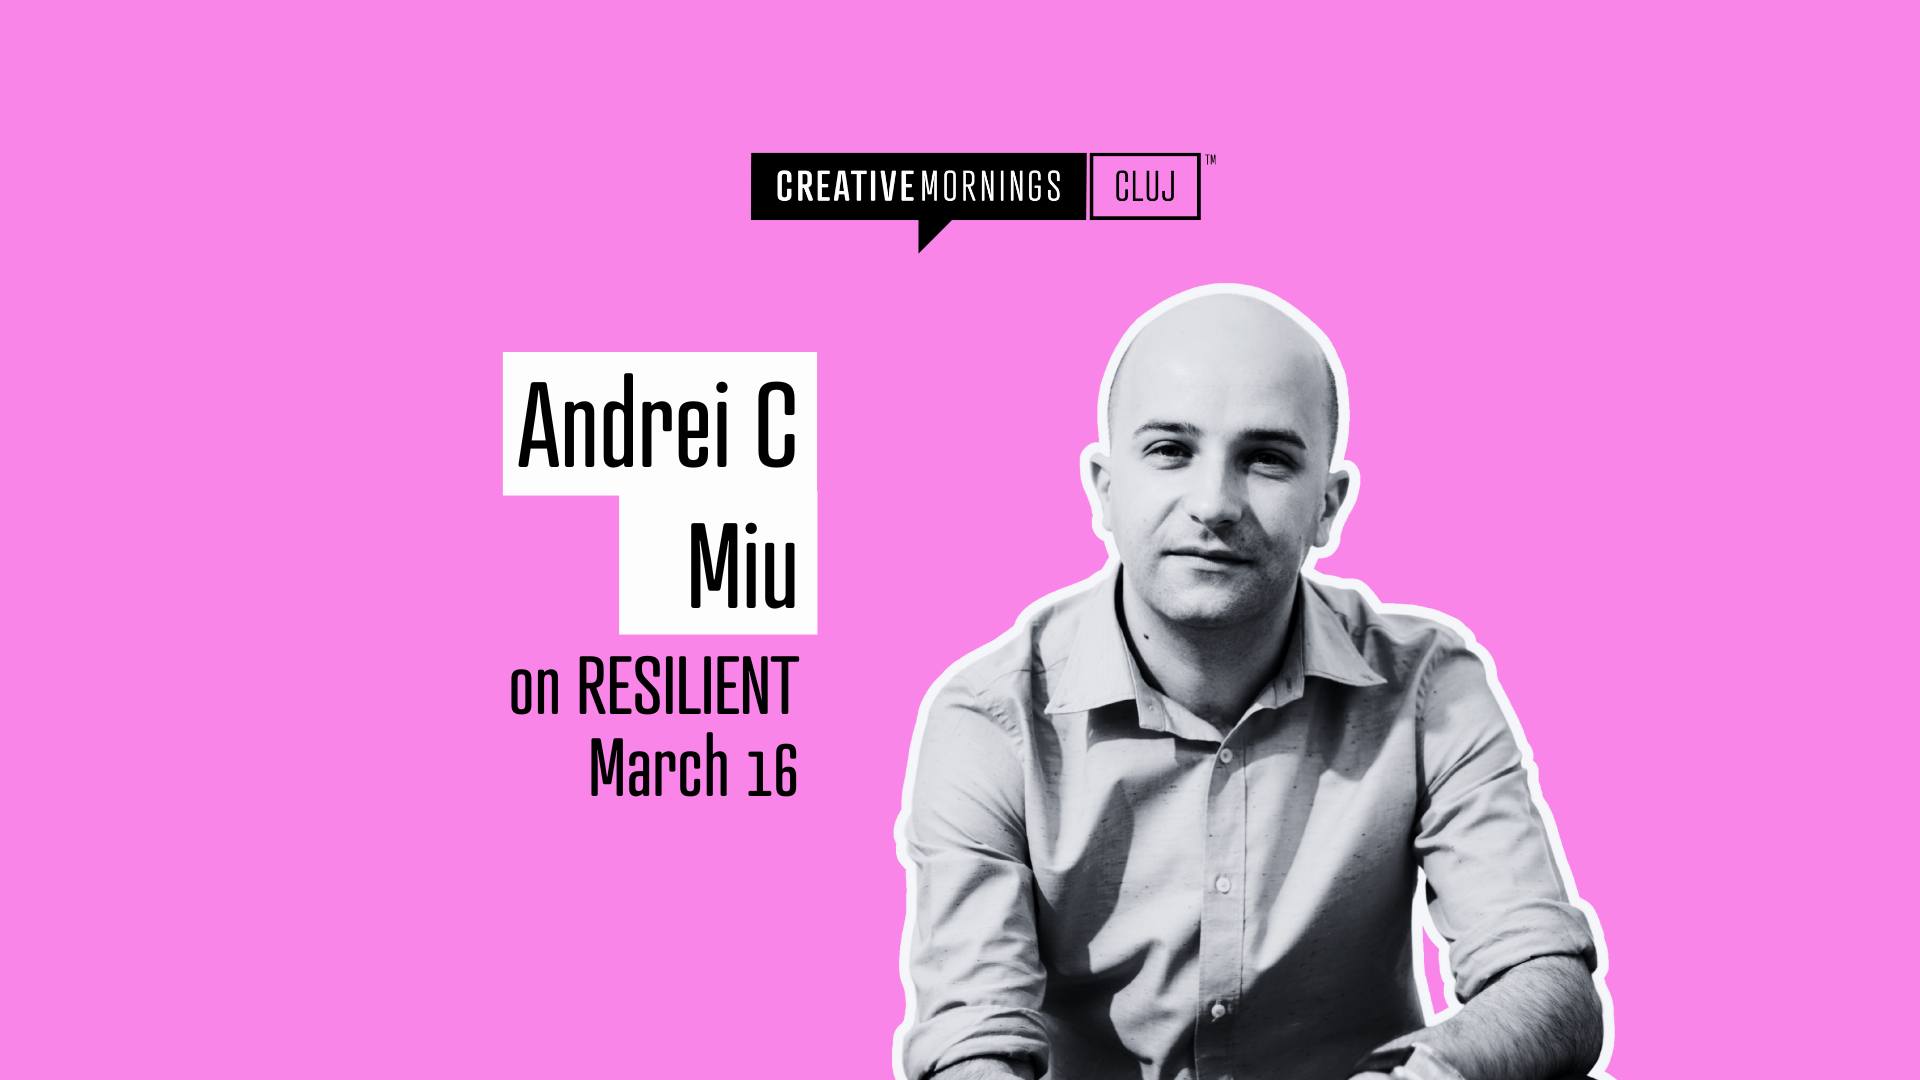 CreativeMornings Cluj on Resilient with Andrei C Miu